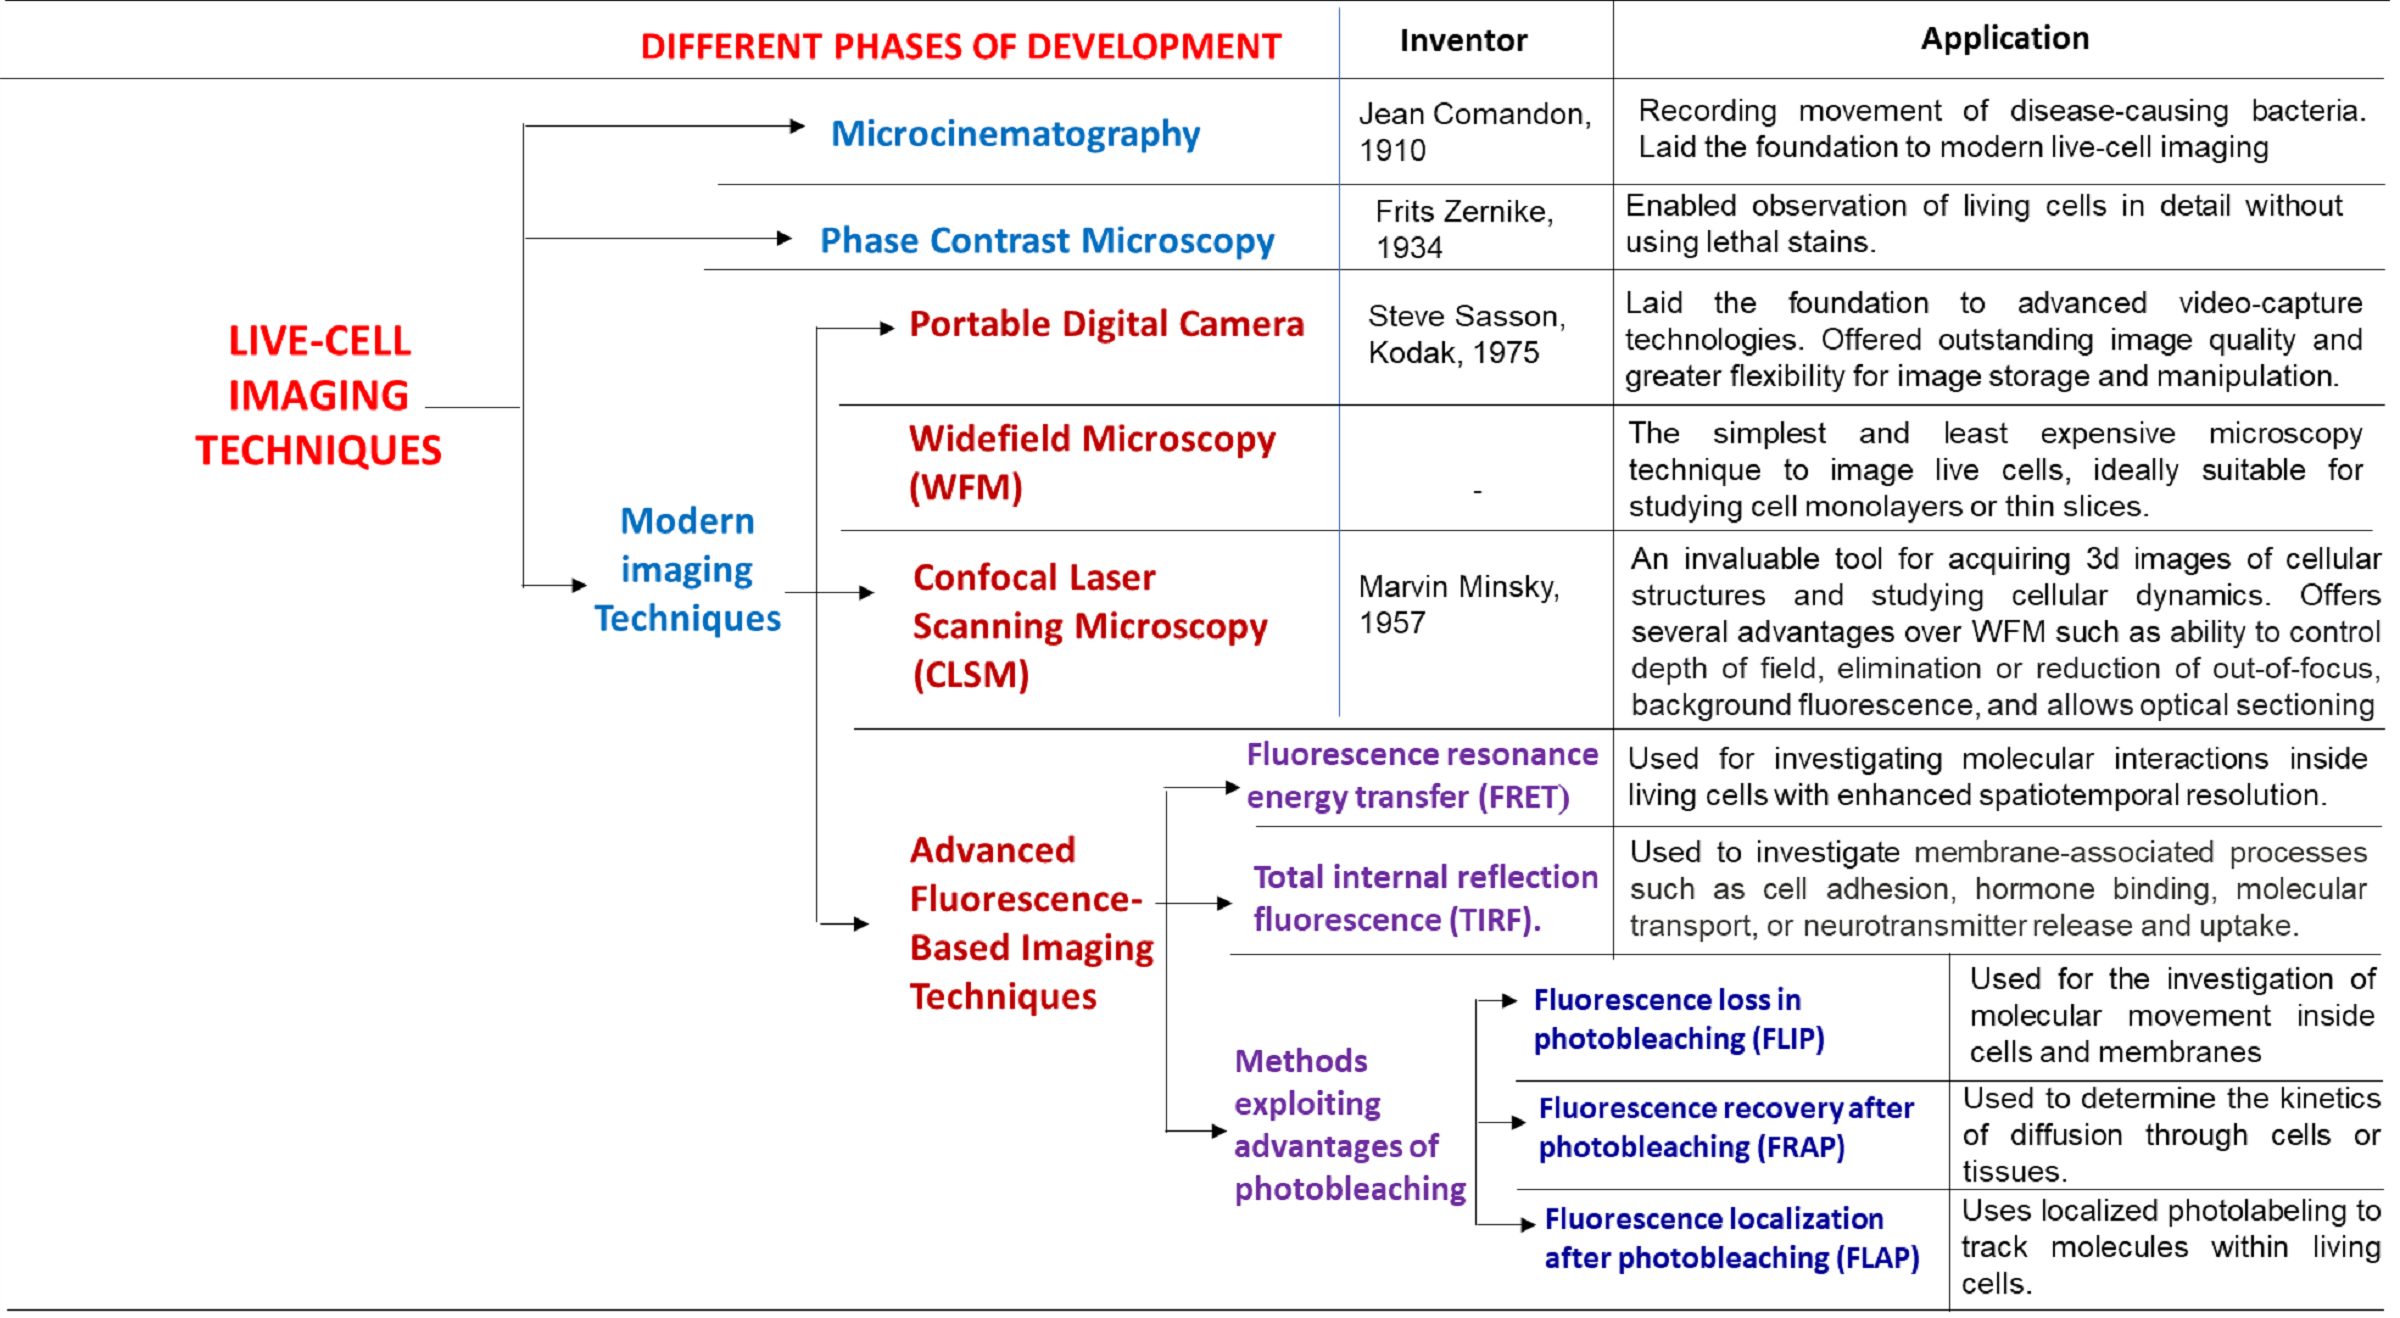 Table 1 | Different techniques used in live-cell imaging